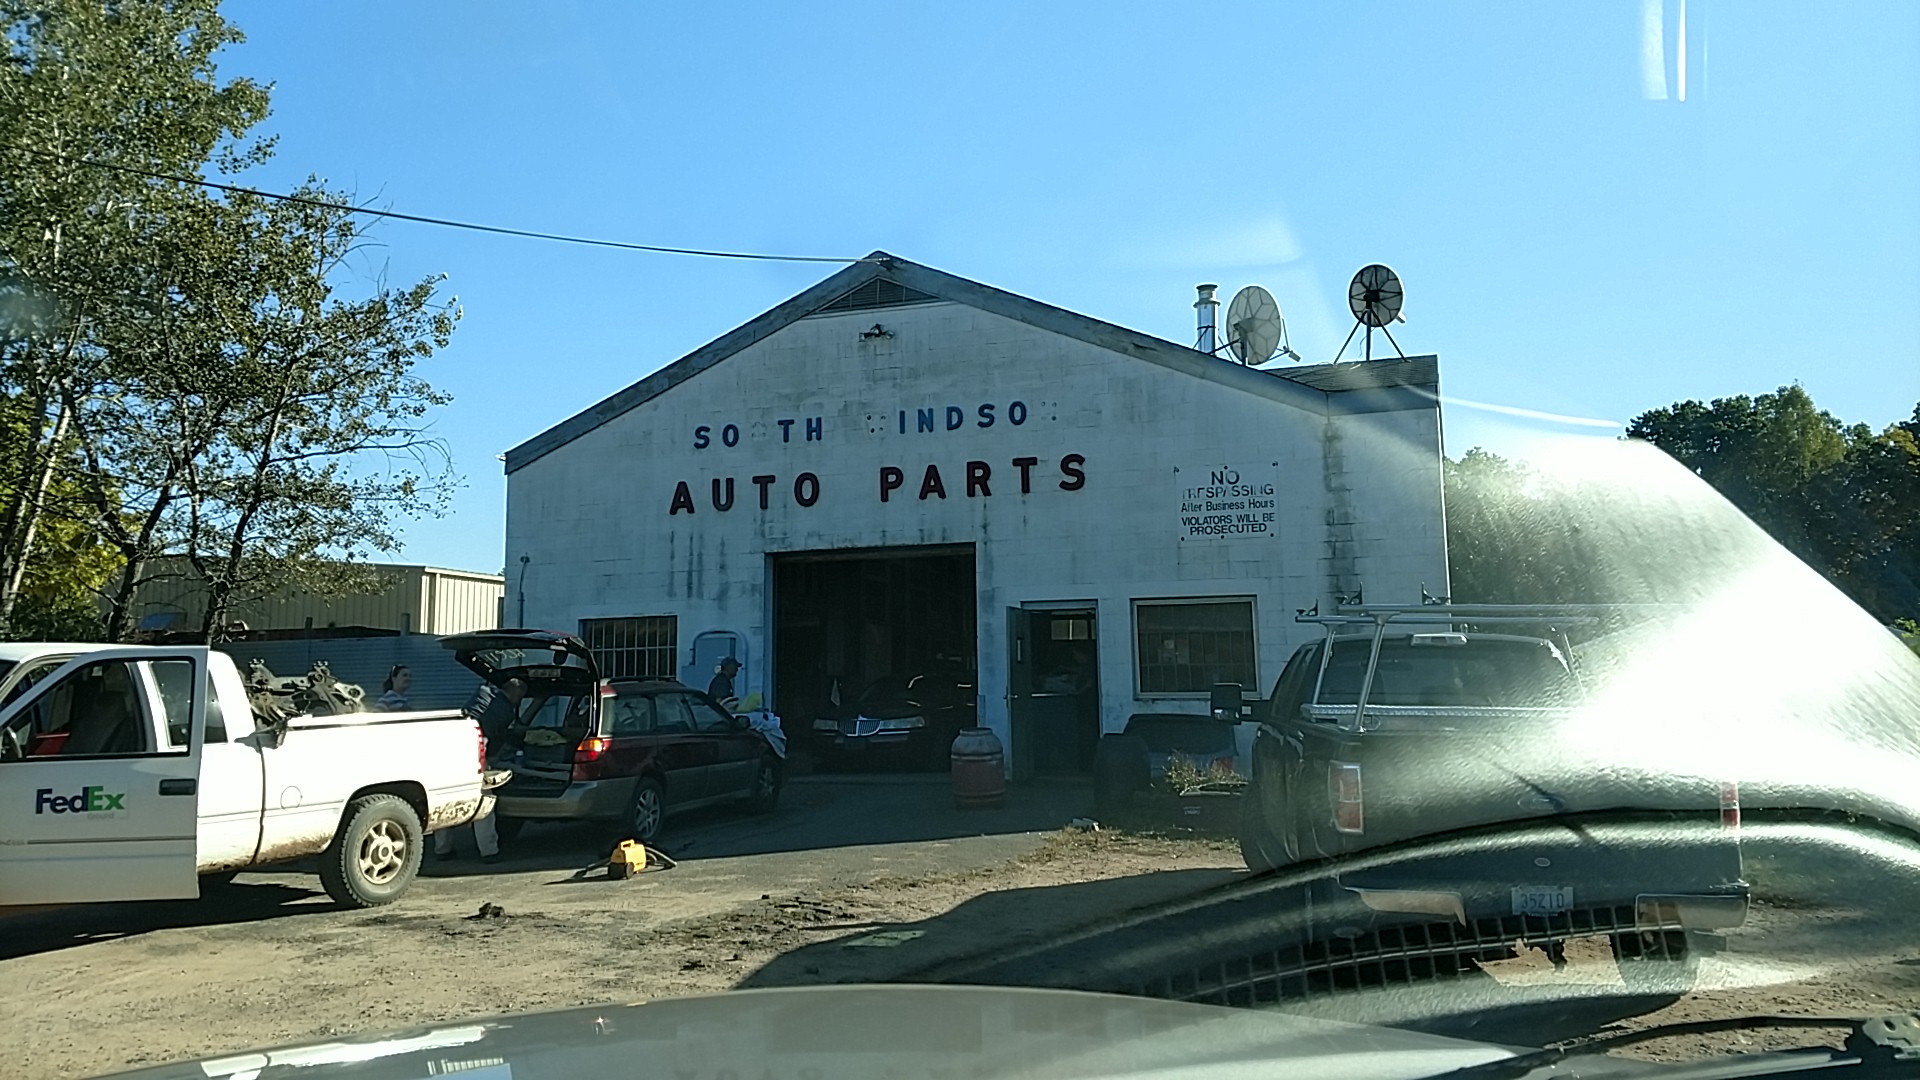 Auto parts store In South Windsor CT 